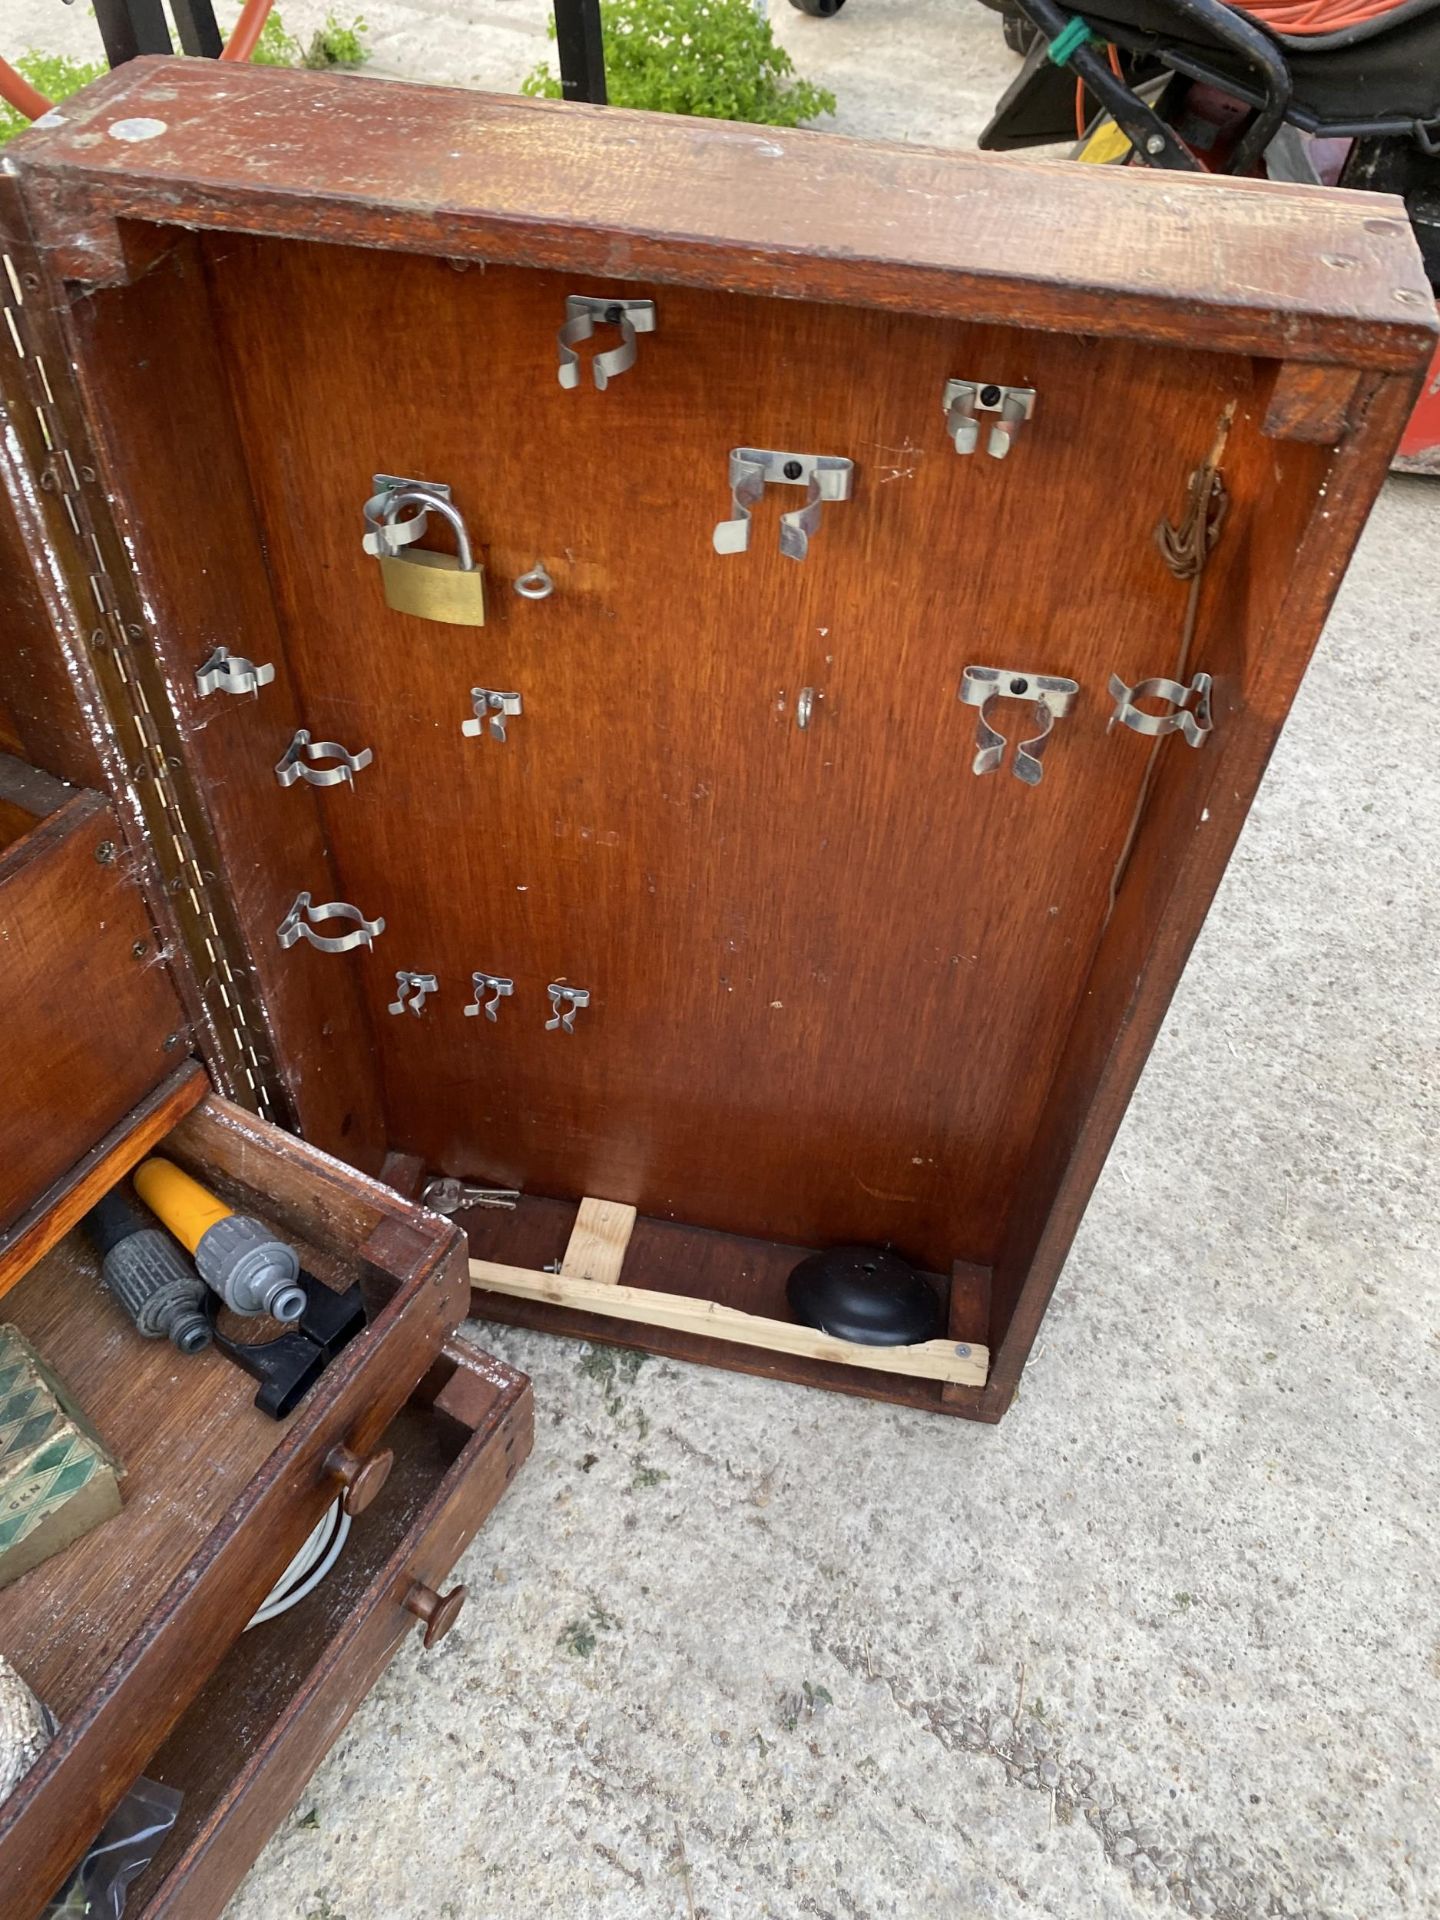 A LARGE VINTAGE WOODEN JOINERS CHEST WITH AN ASSORTMENT OF TOOLS - Image 3 of 3